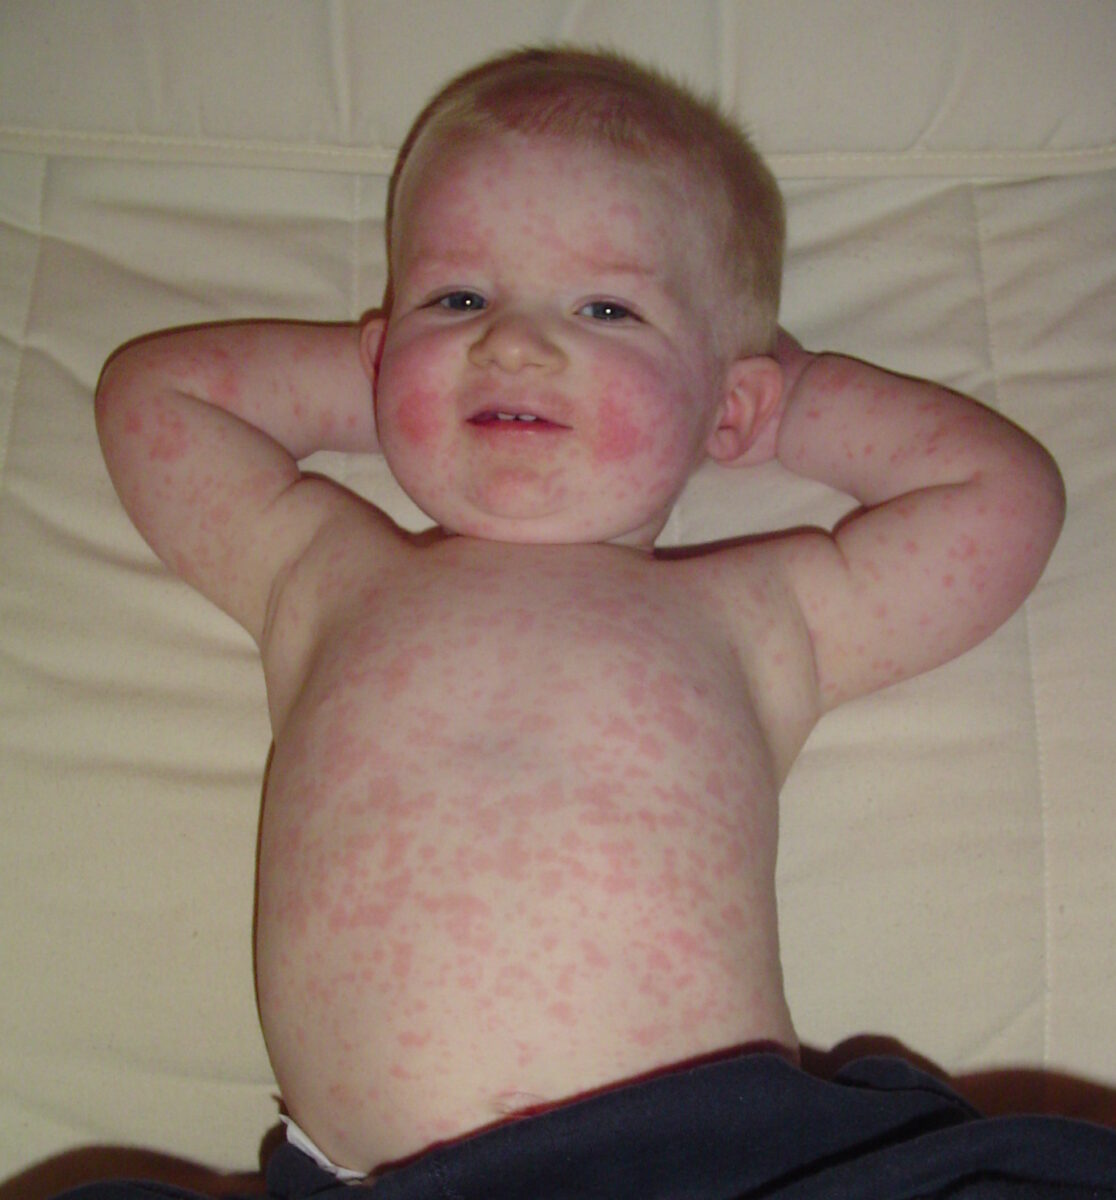 Pediatric patient with fifth disease